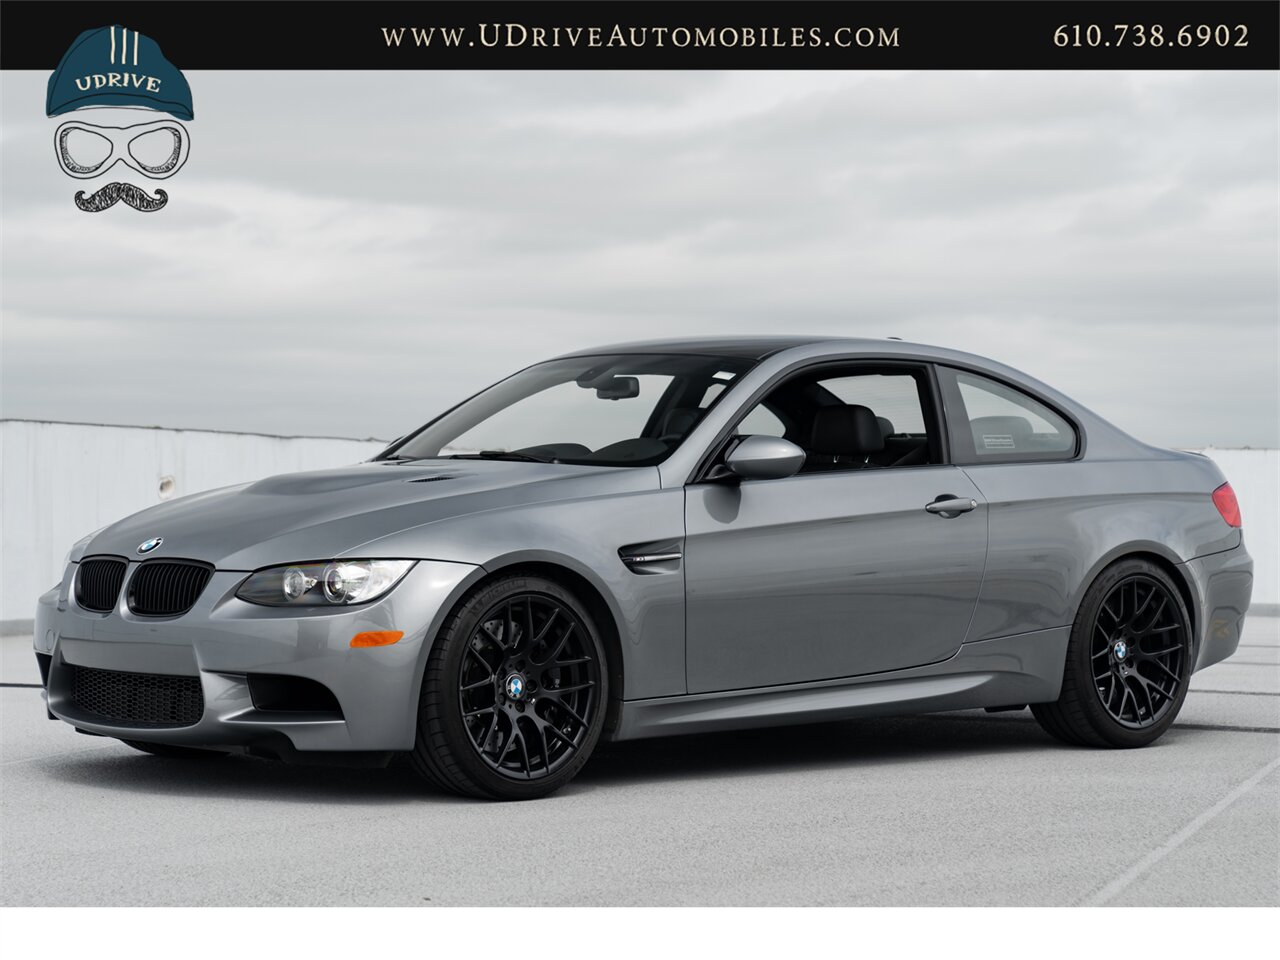 2012 BMW M3 E92 6 Speed 7k Miles Dinan Upgrades  GTS/359 Wheels Carbon Fiber Roof - Photo 10 - West Chester, PA 19382